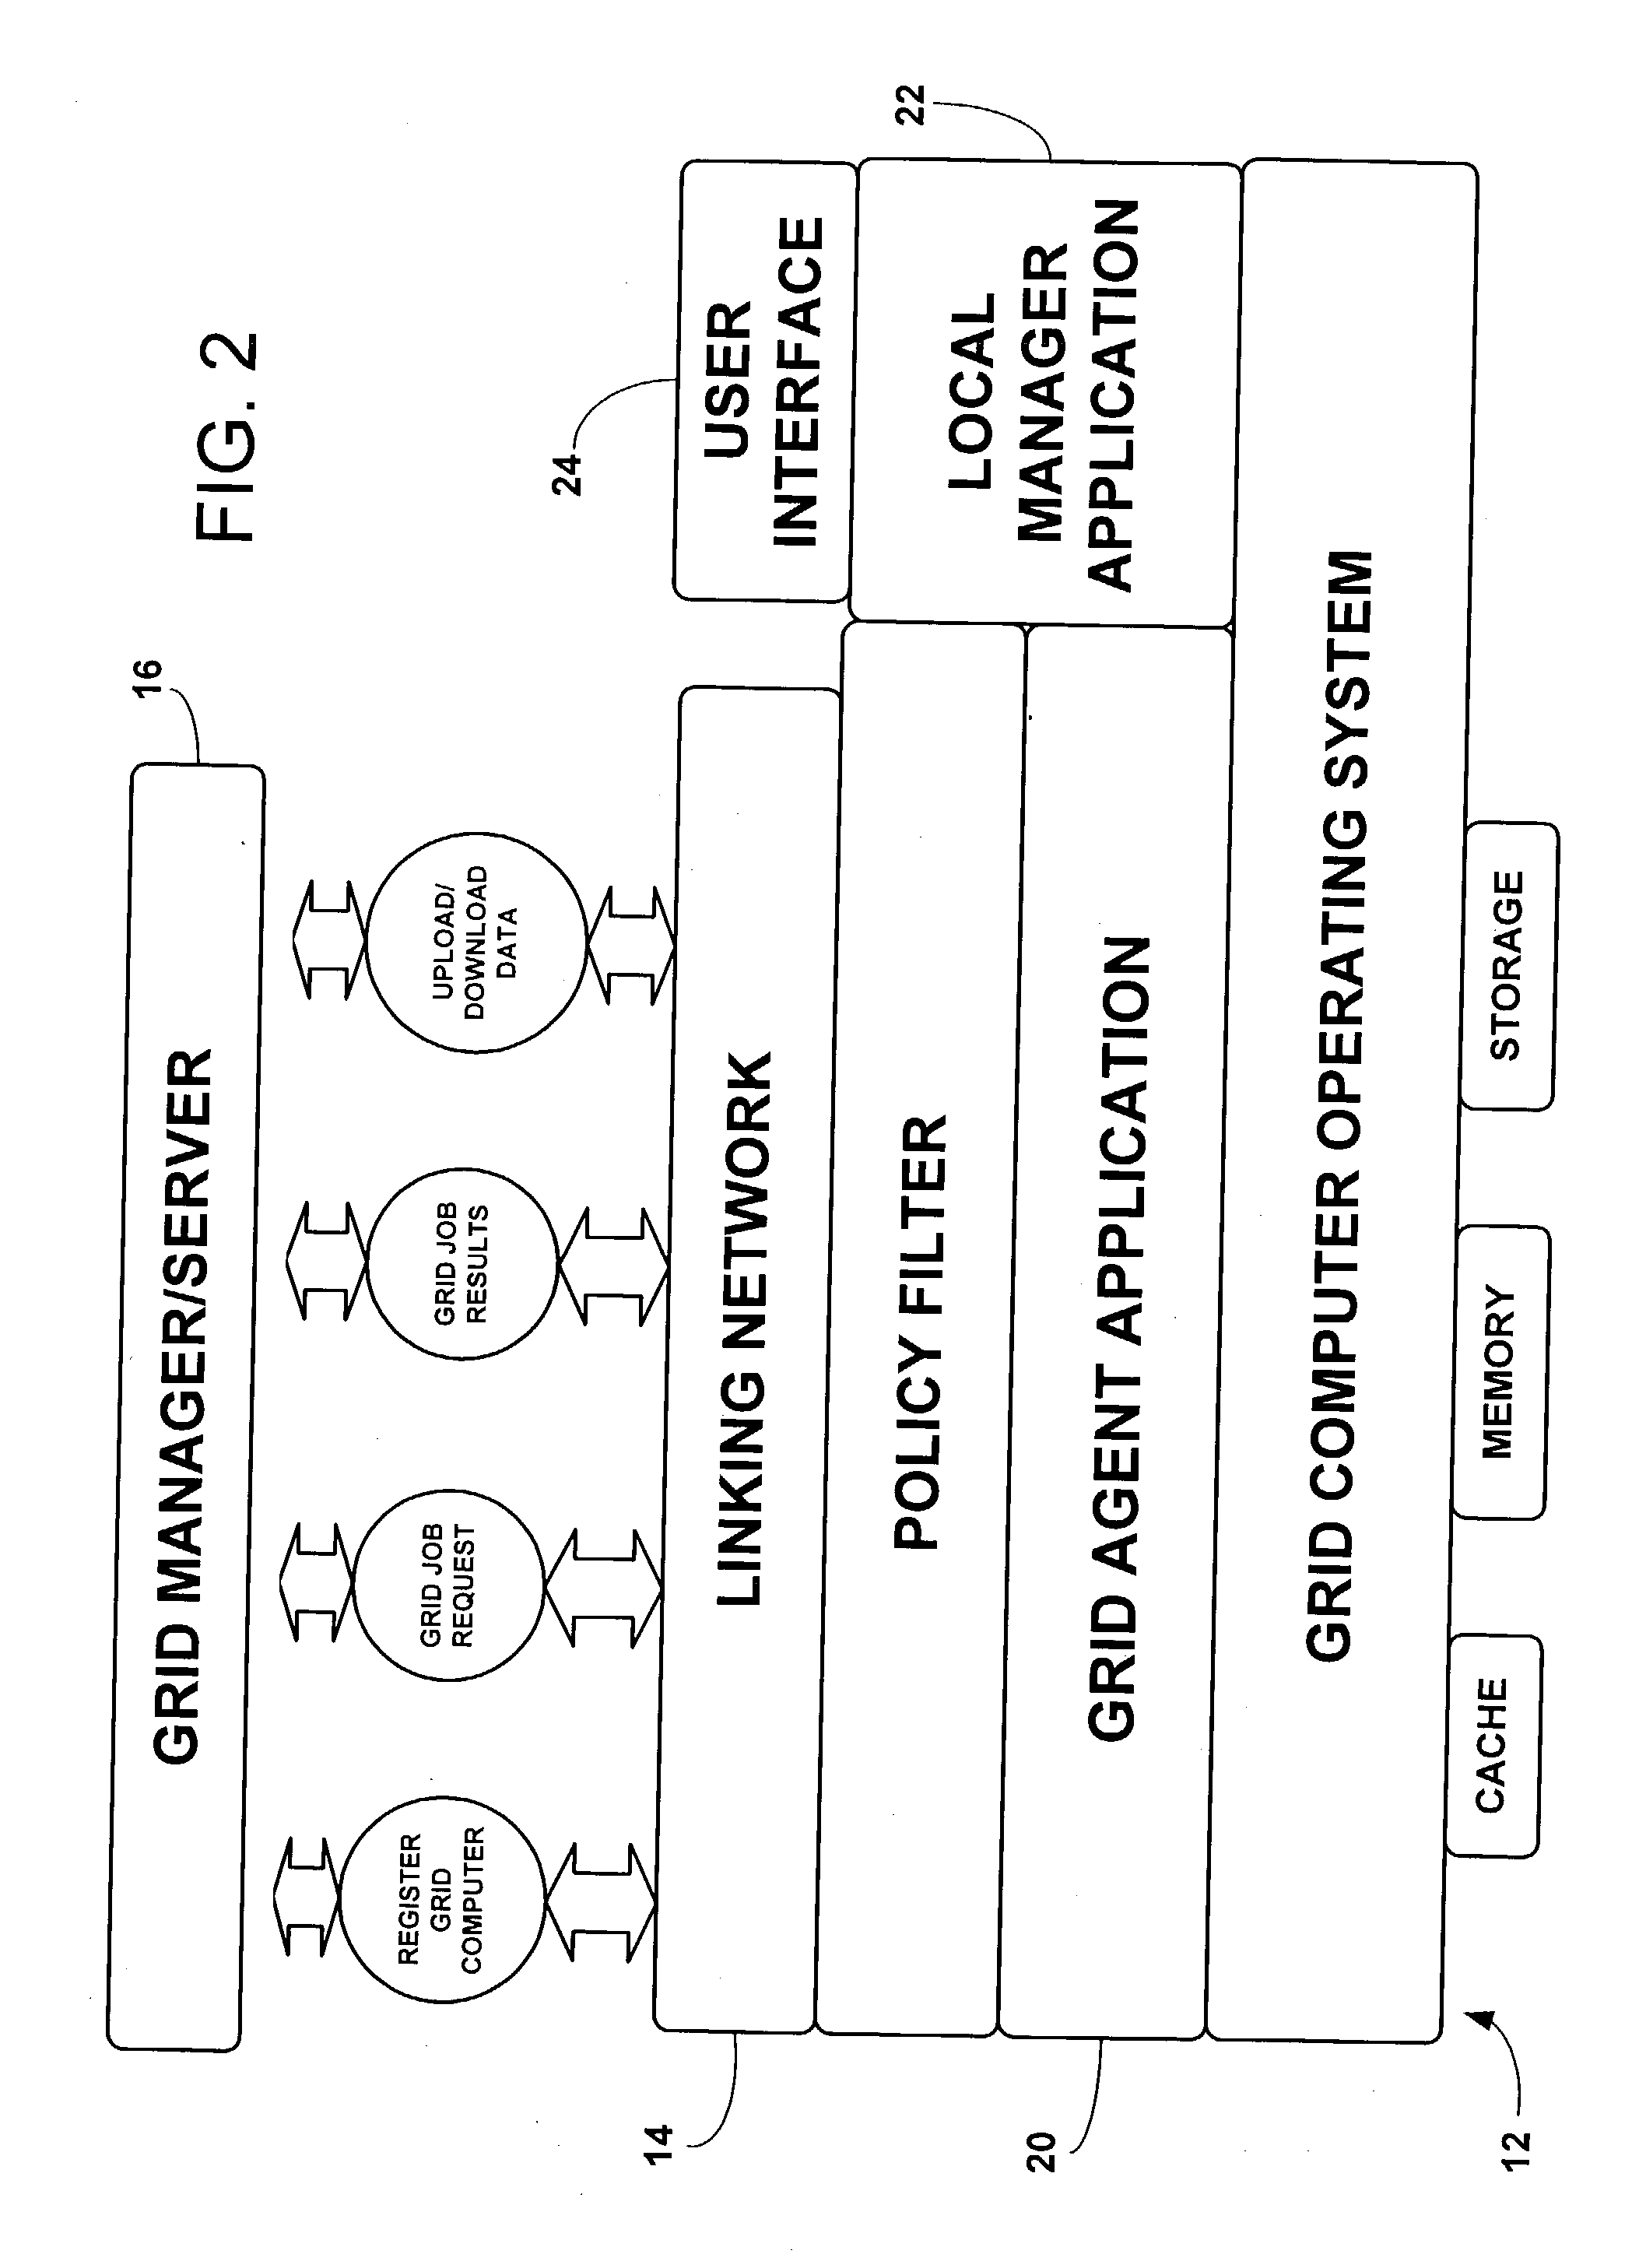 System for restricting use of a grid computer by a computing grid